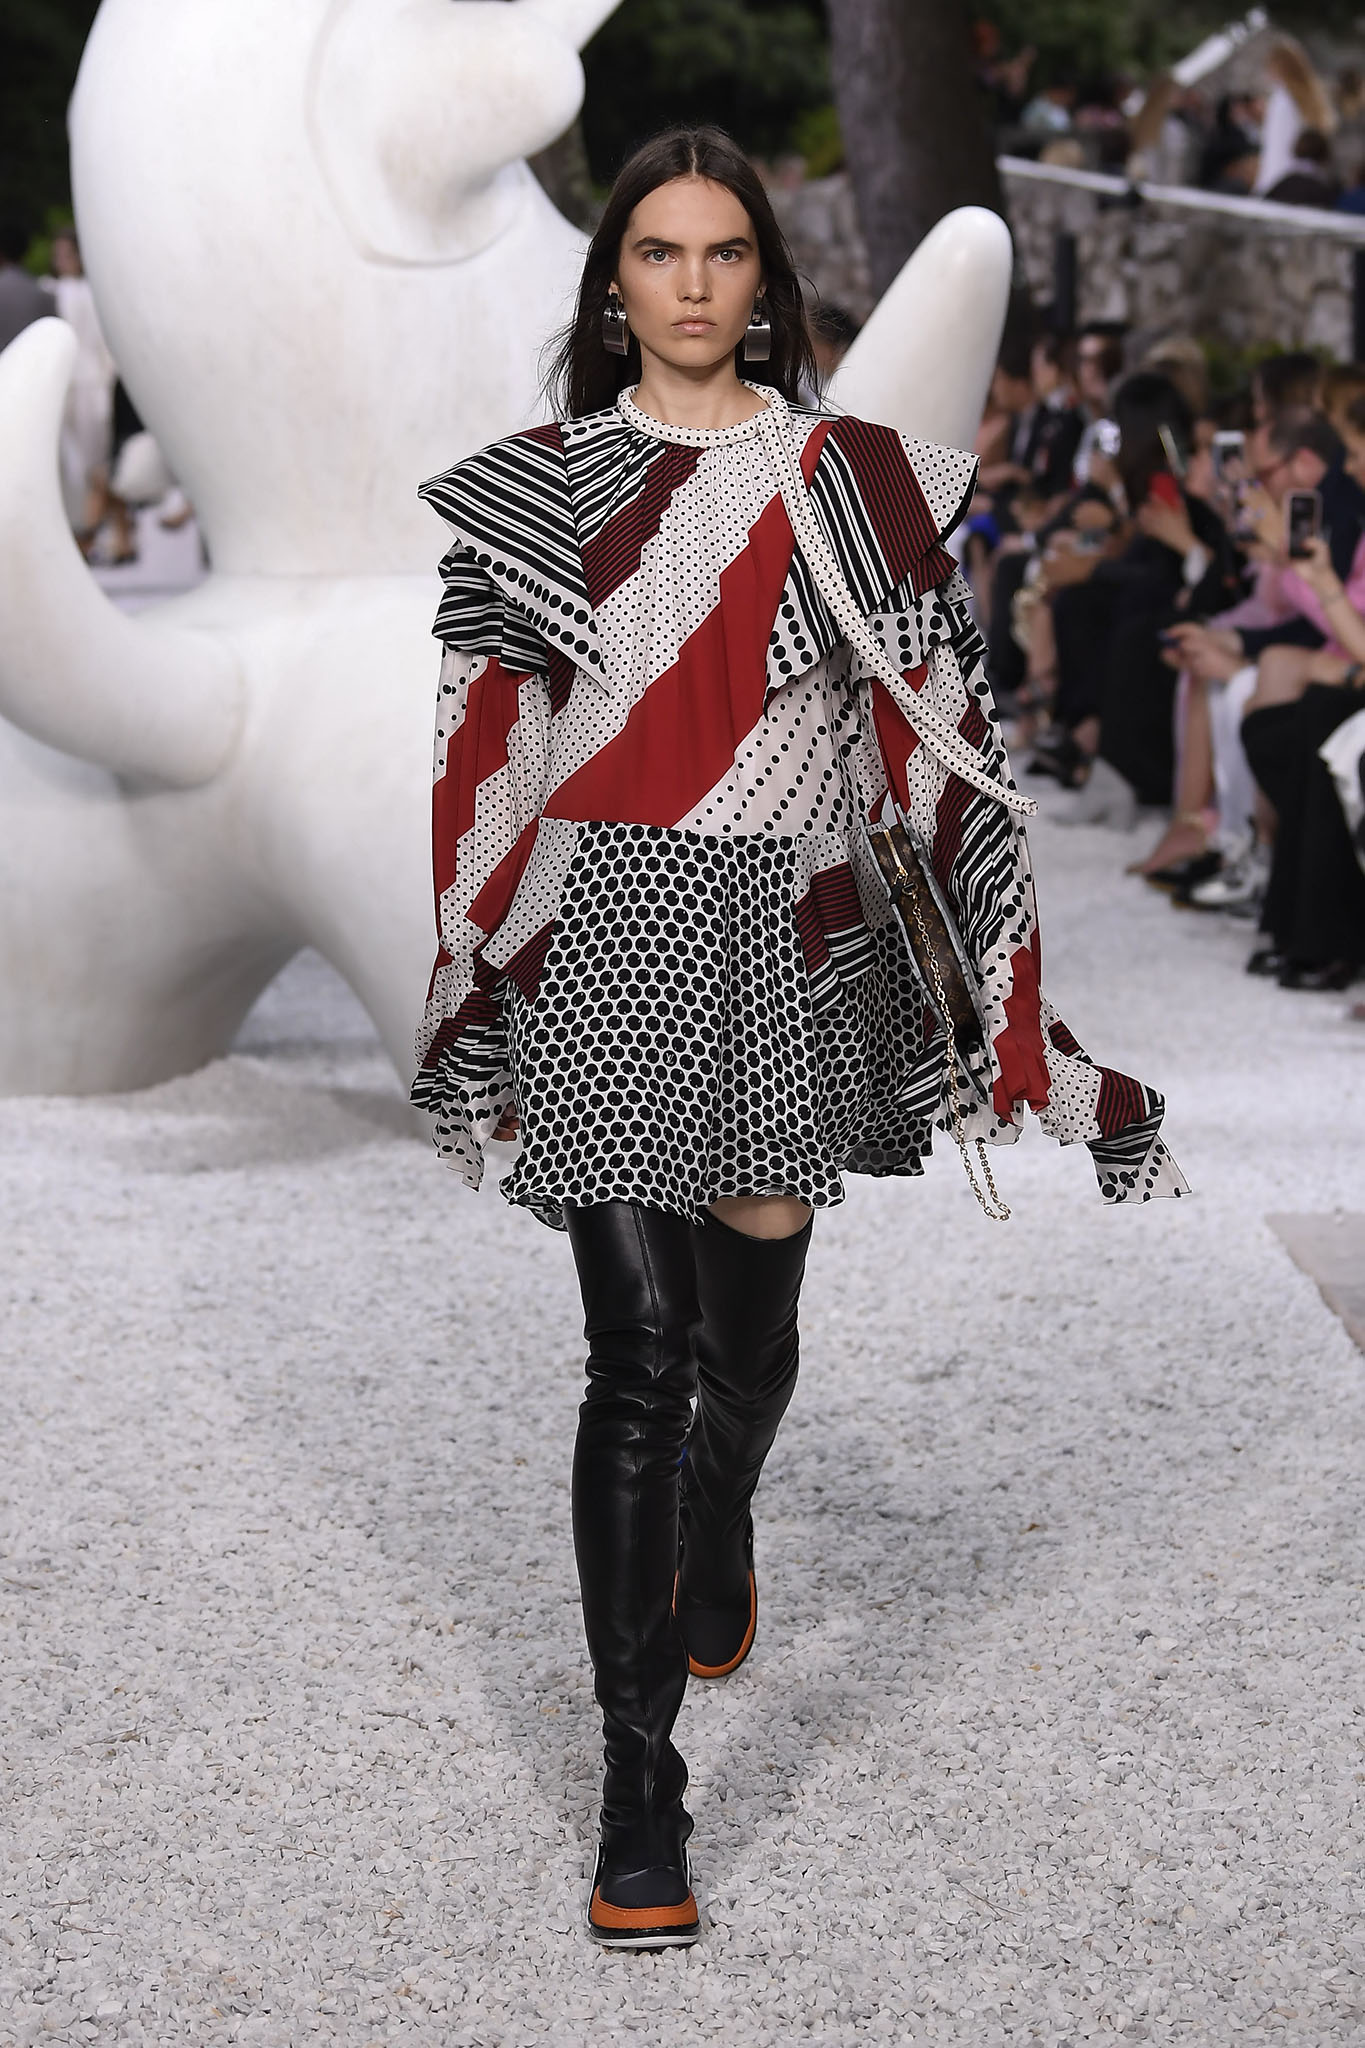 Off the runway: Louis Vuitton Cruise 2019 Collection